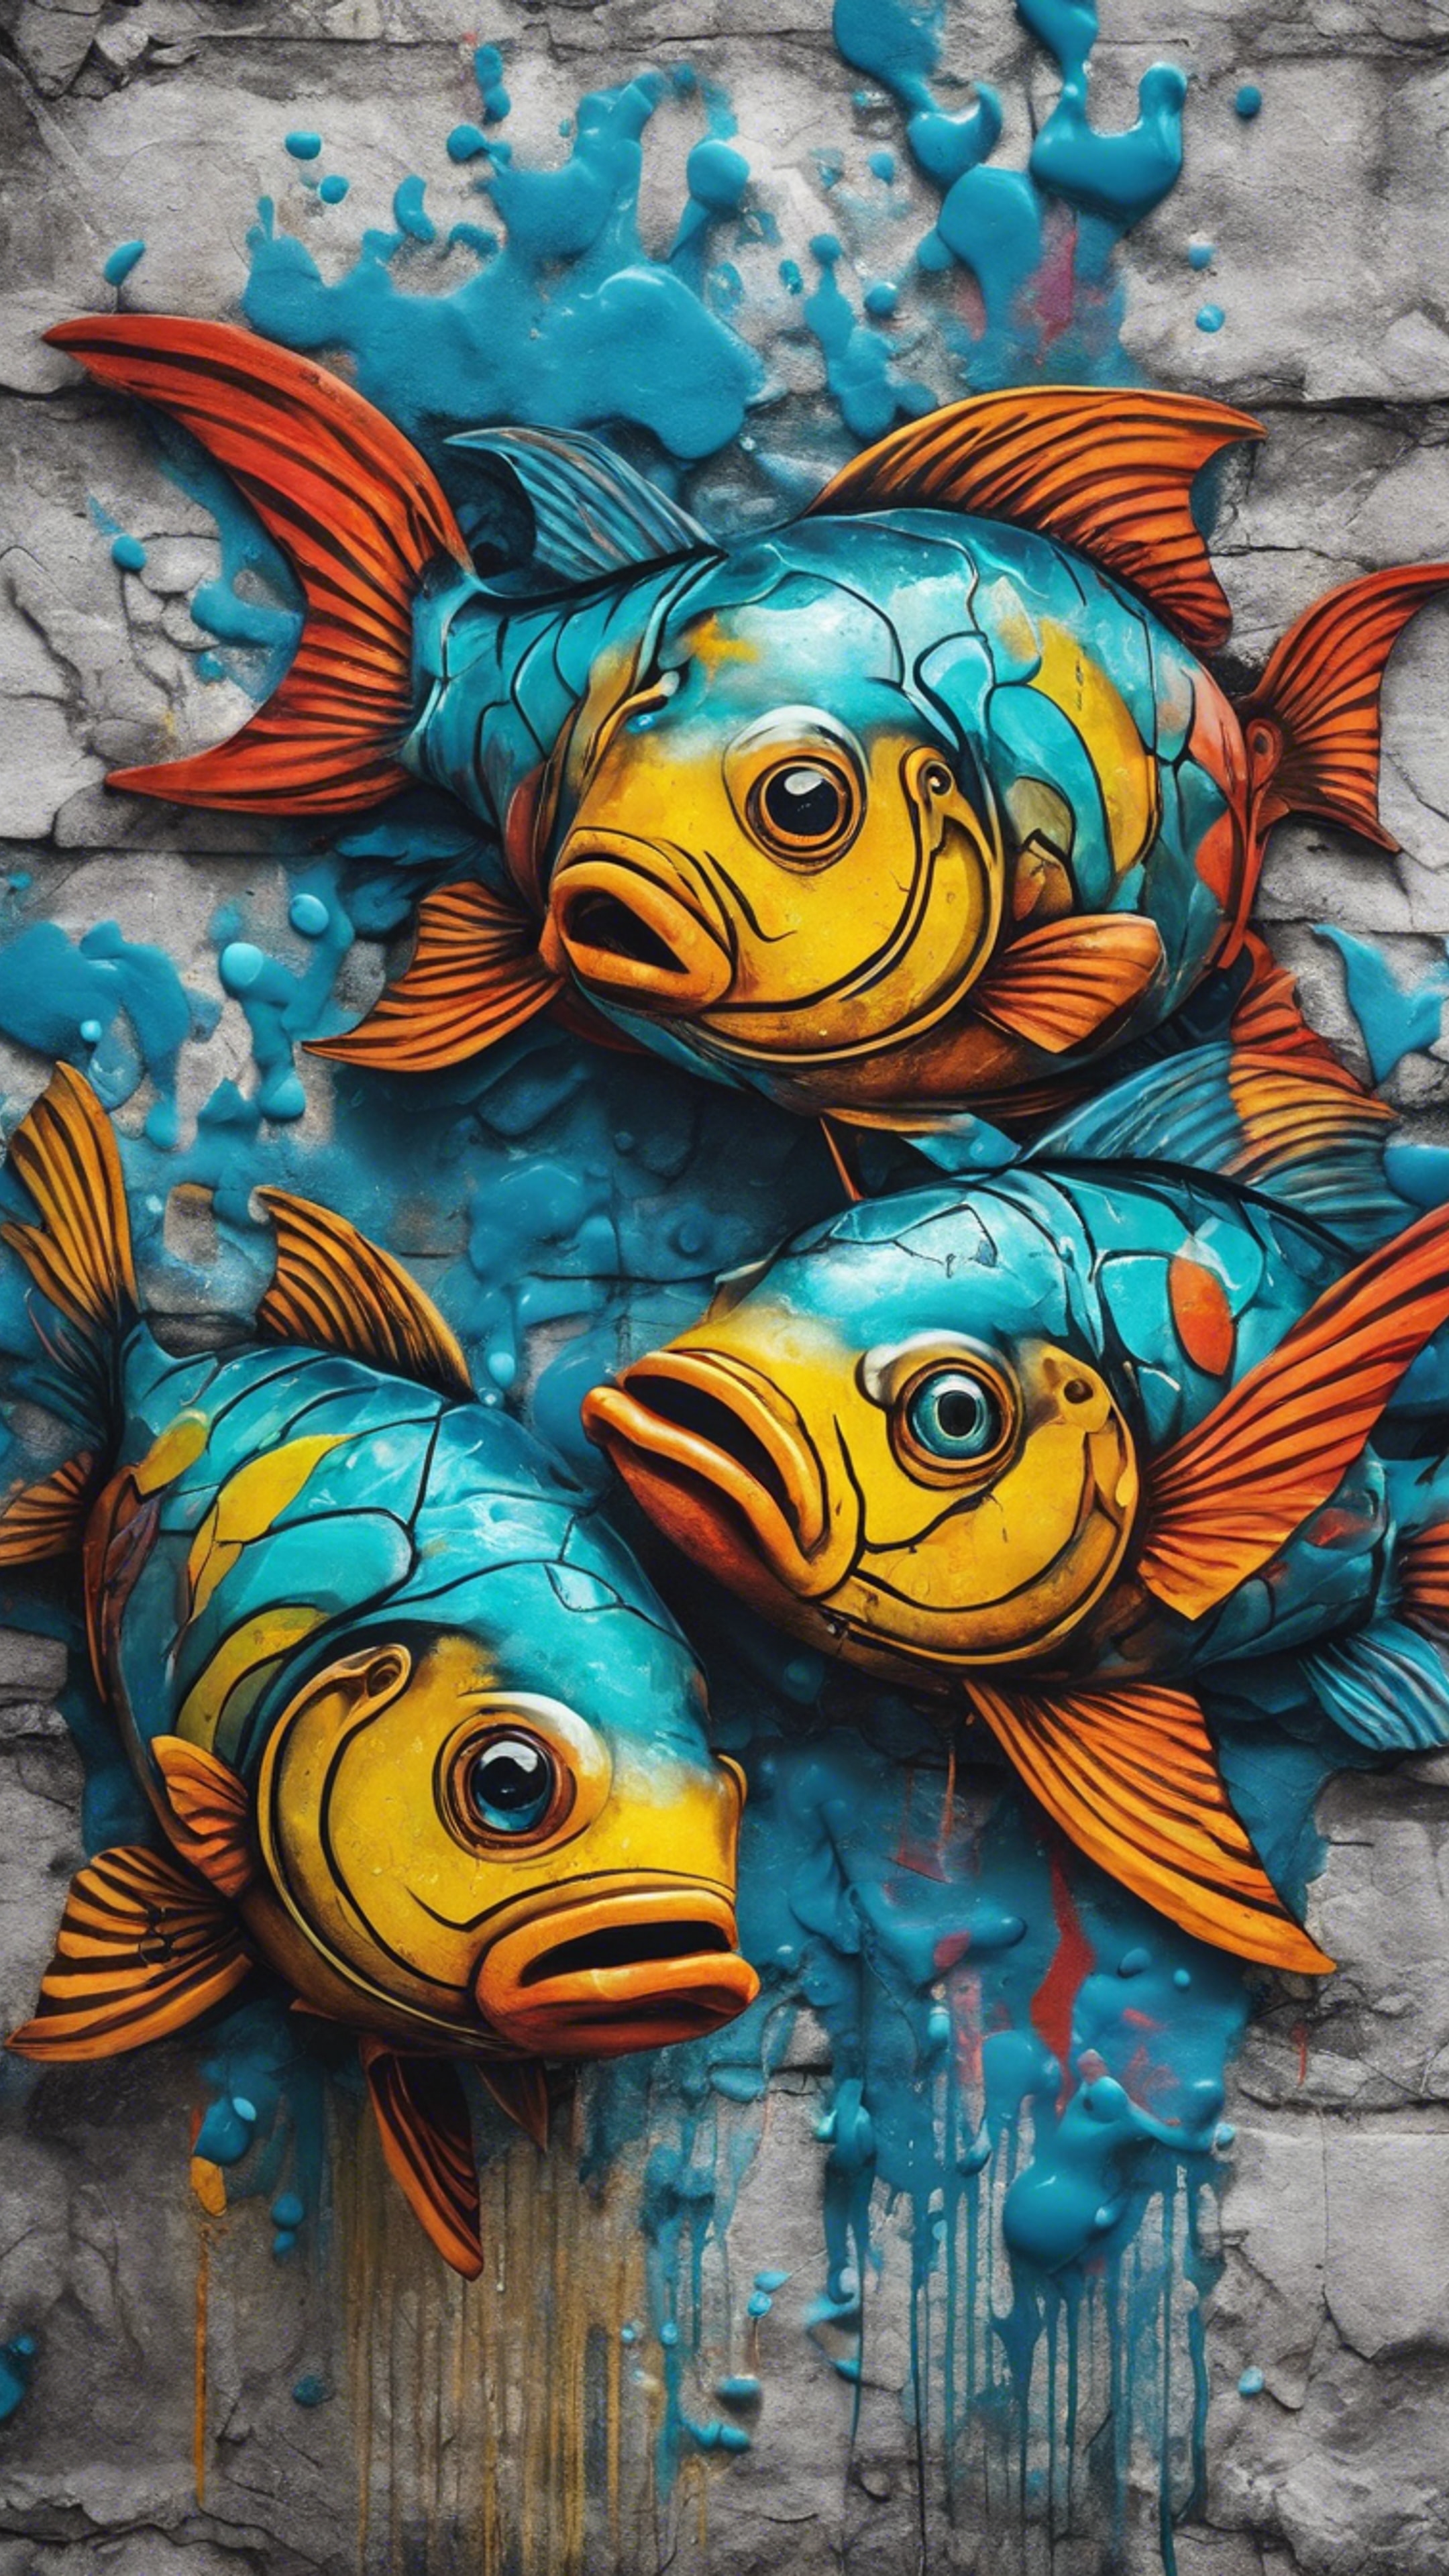 A vibrant street art depicting Pisces as two playful fish, on a textured wall with dynamic splashes of color. Ფონი[a1e08805c6ad437f94cb]